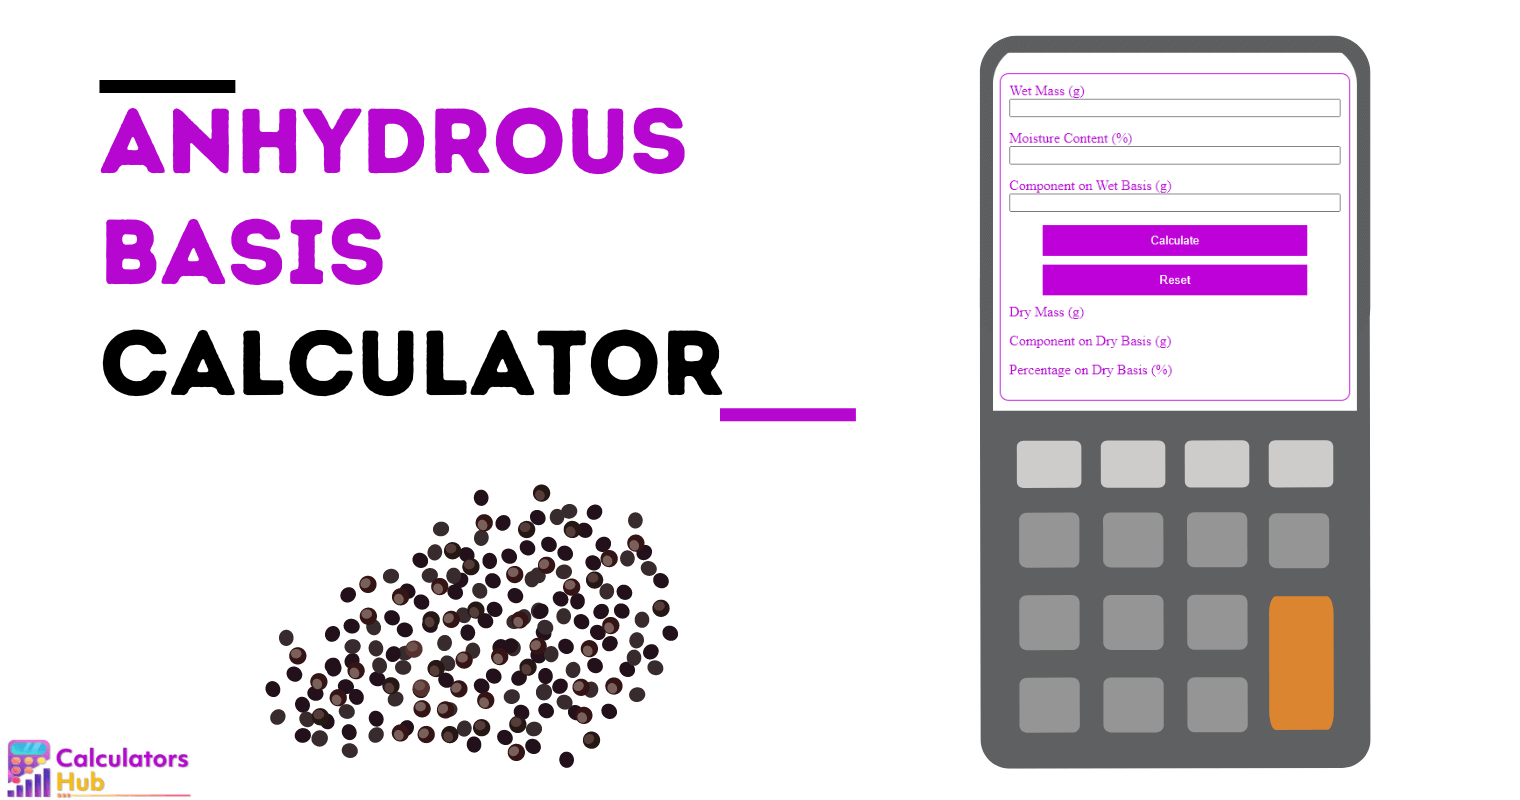 Anhydrous Basis Calculator